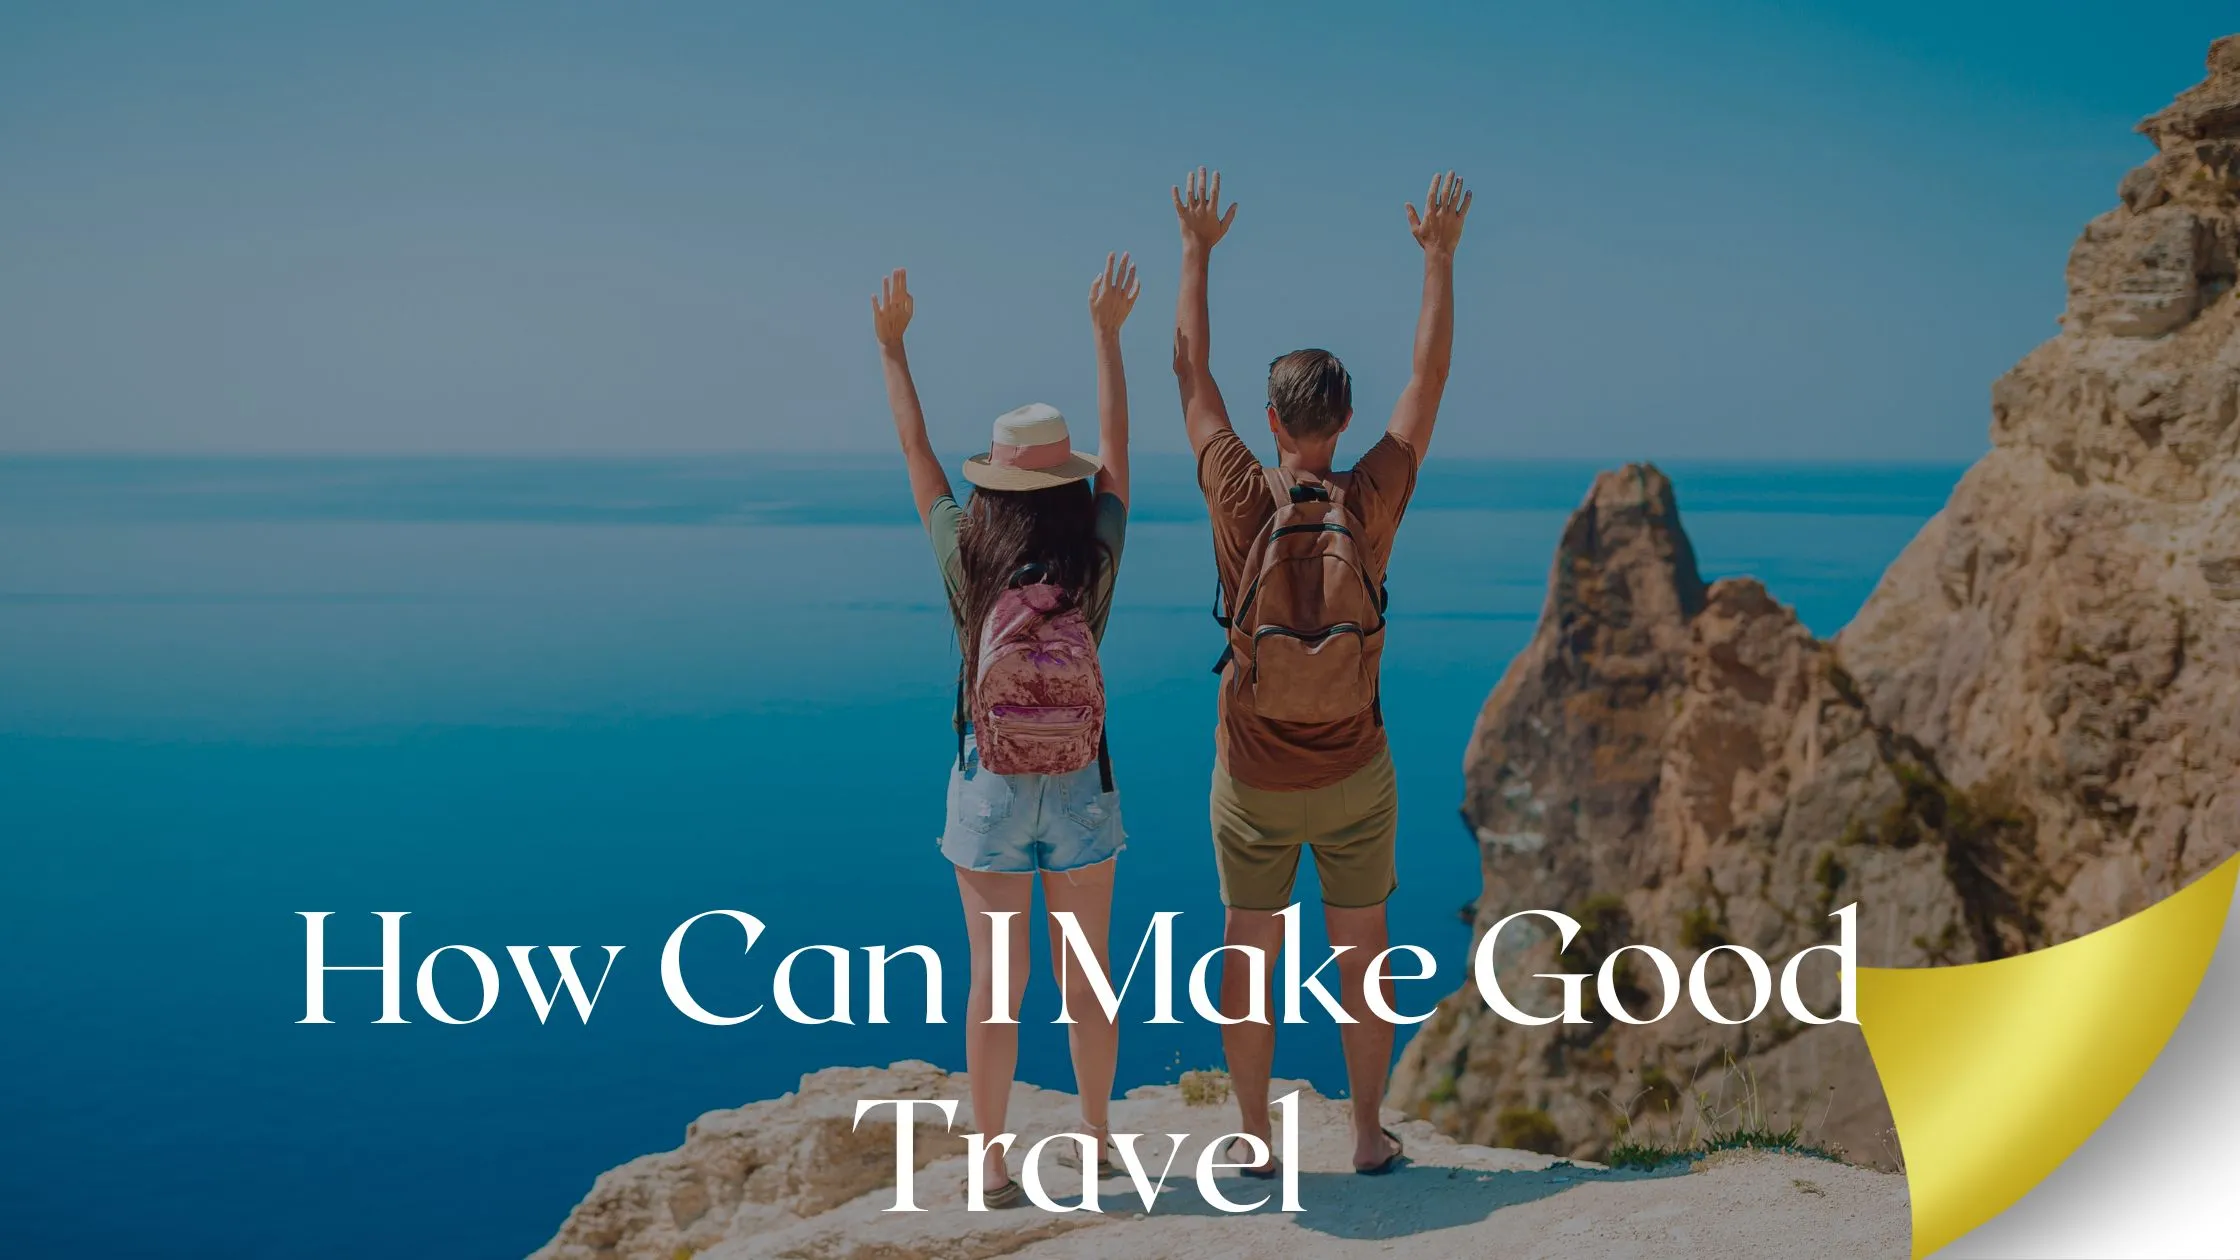 How Can I Make Good Travel